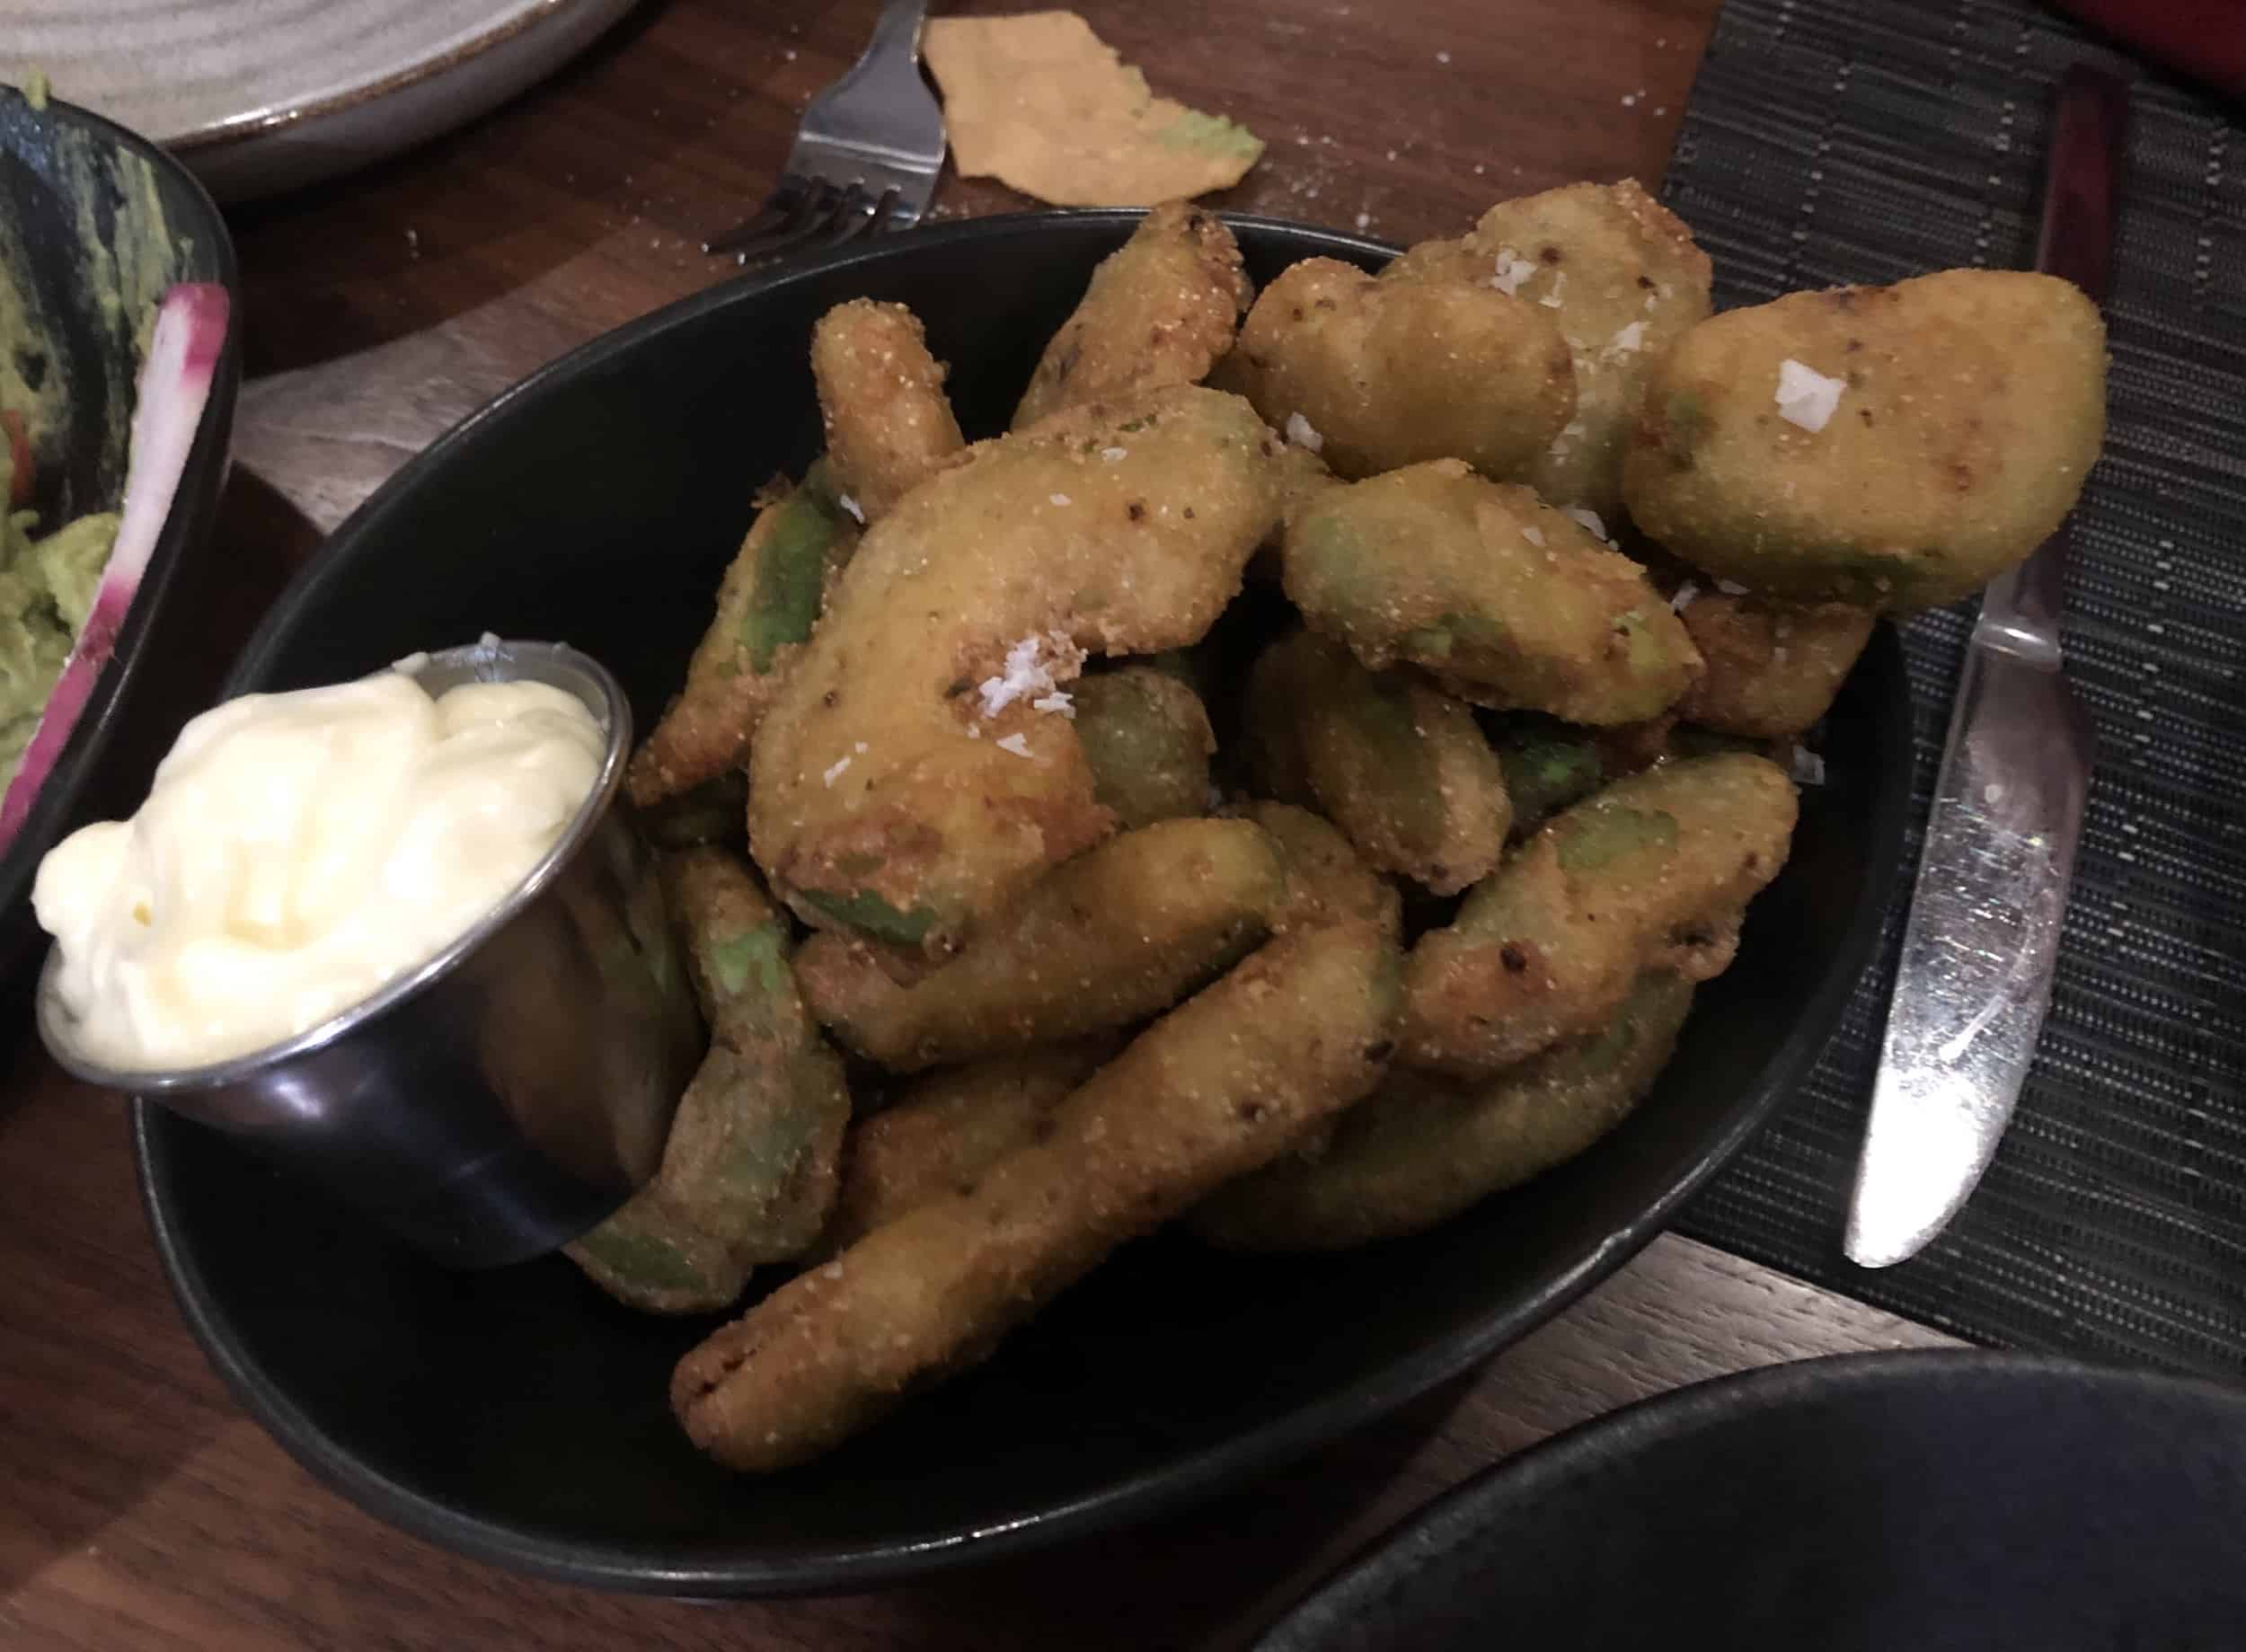 Fried avocados at Provecho Latin Provisions